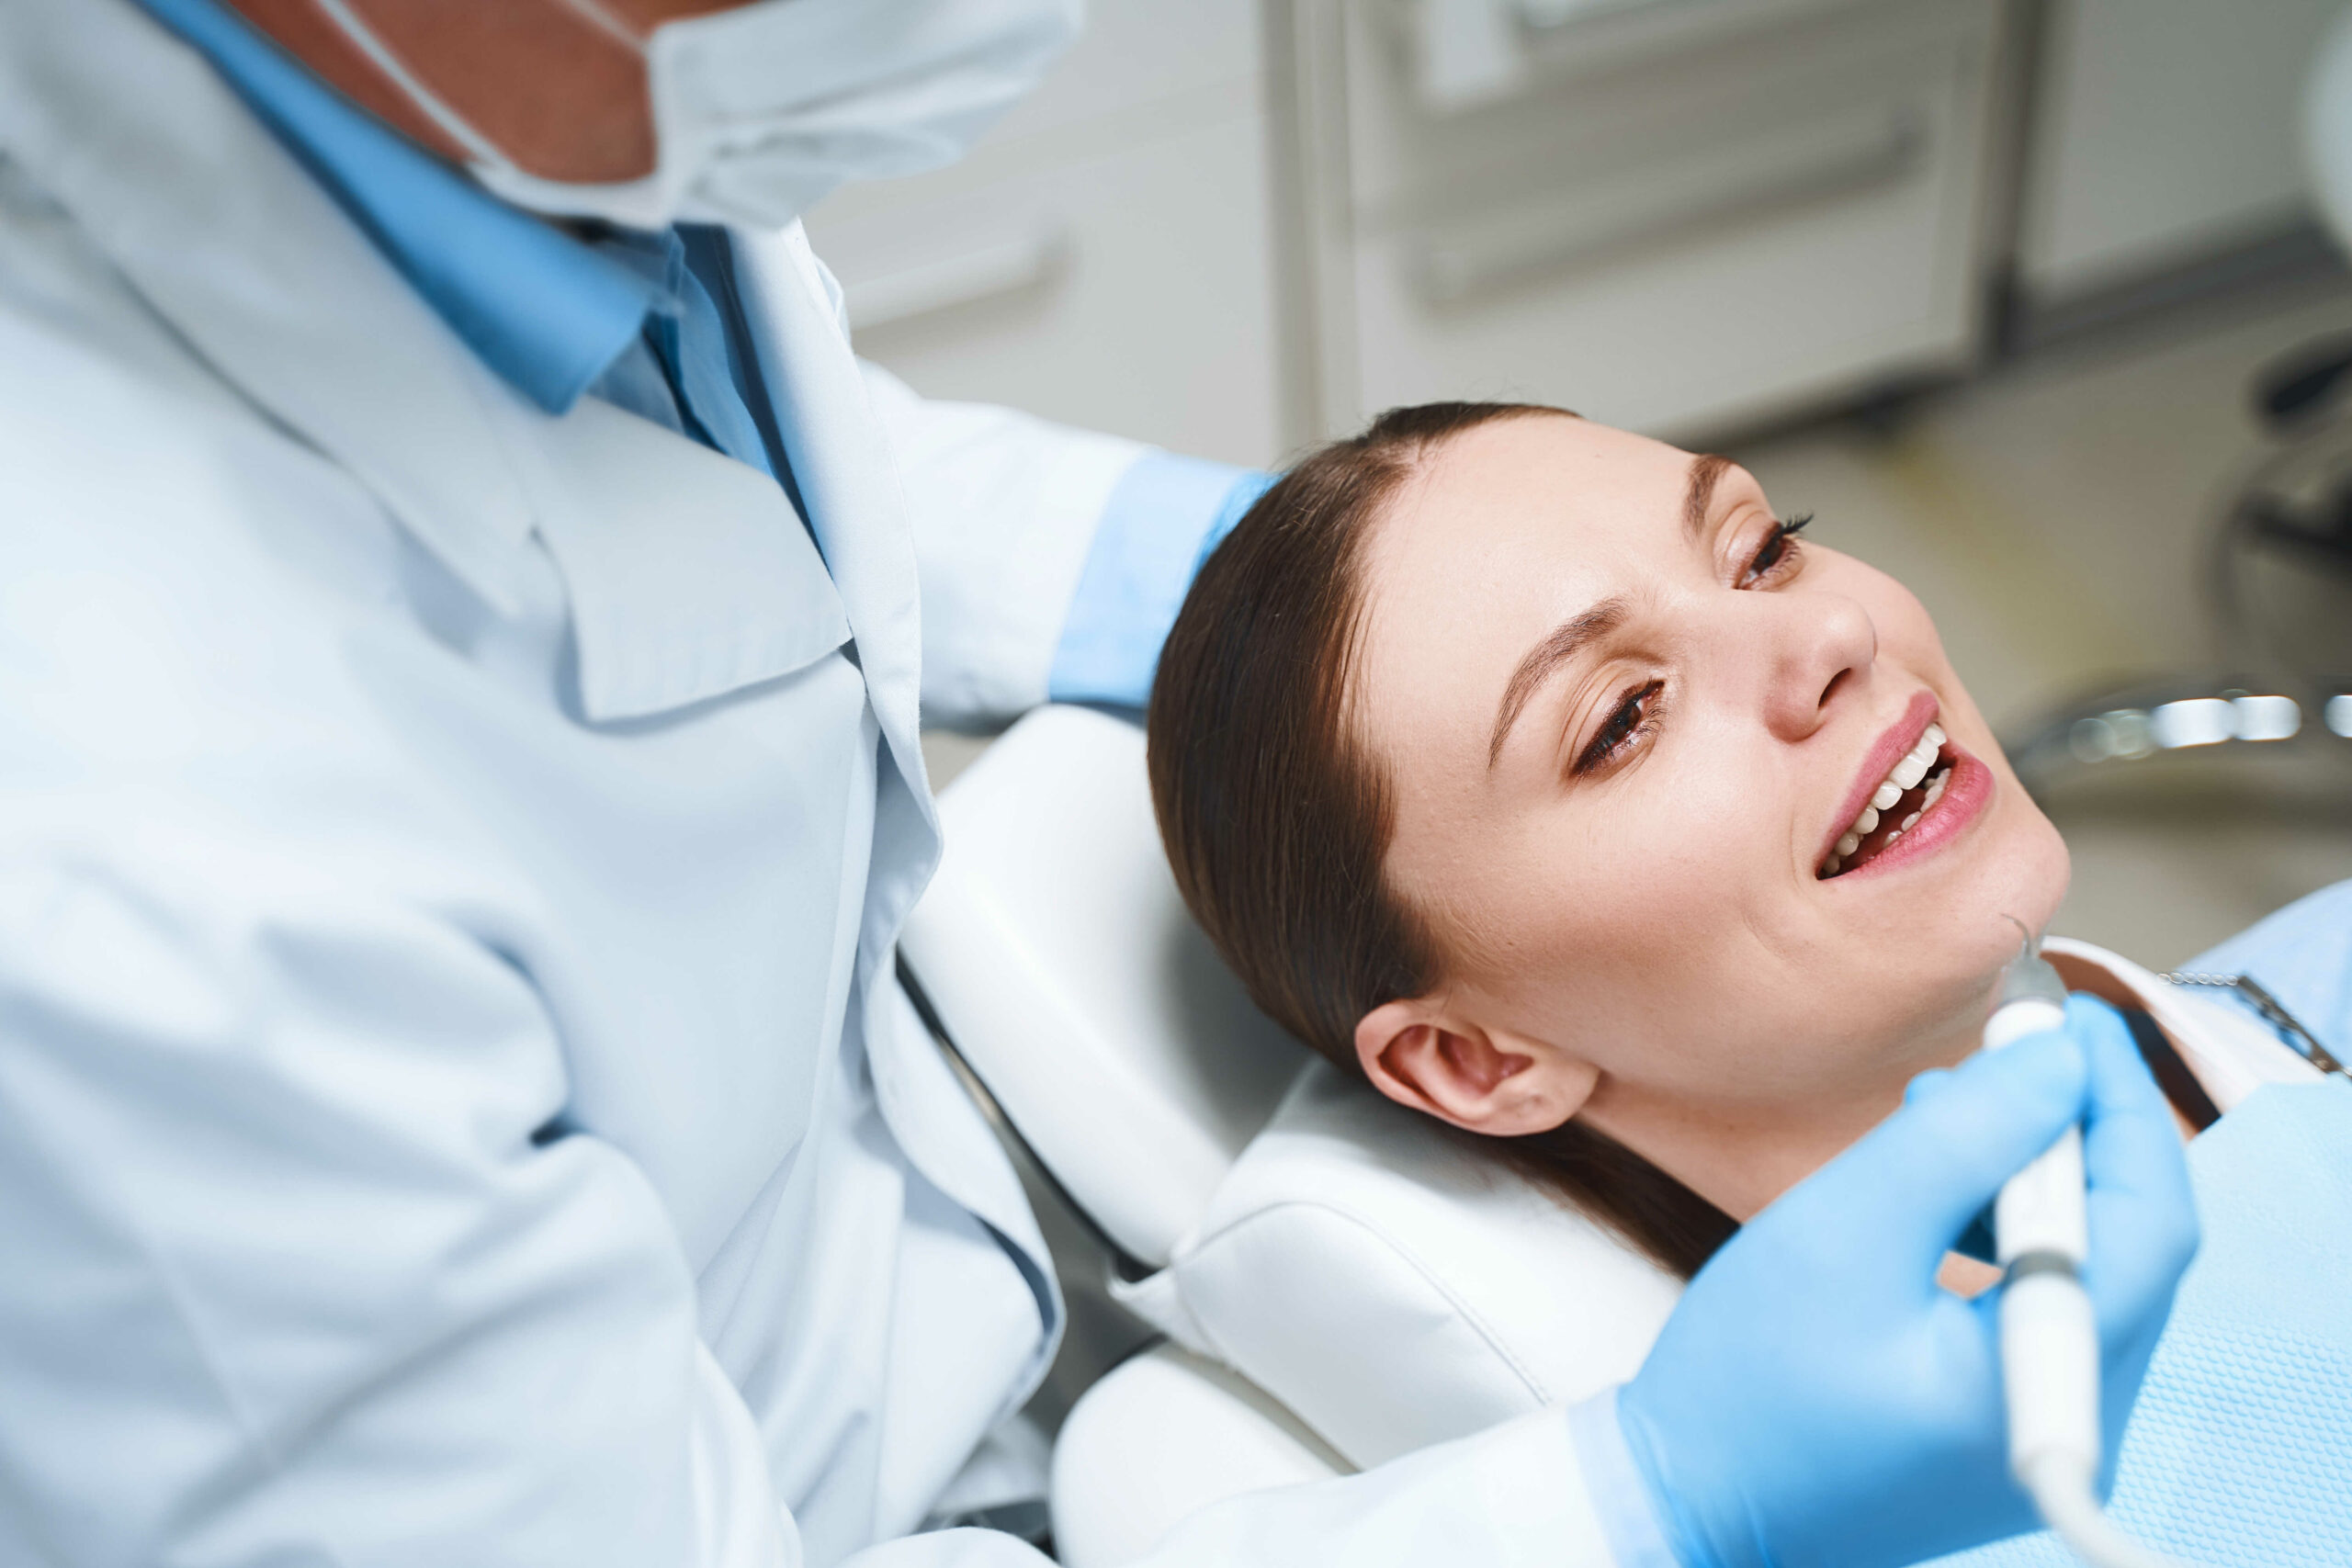 Cheerful woman is lying in chair while being treated by dentist with instrument in Warren, MI